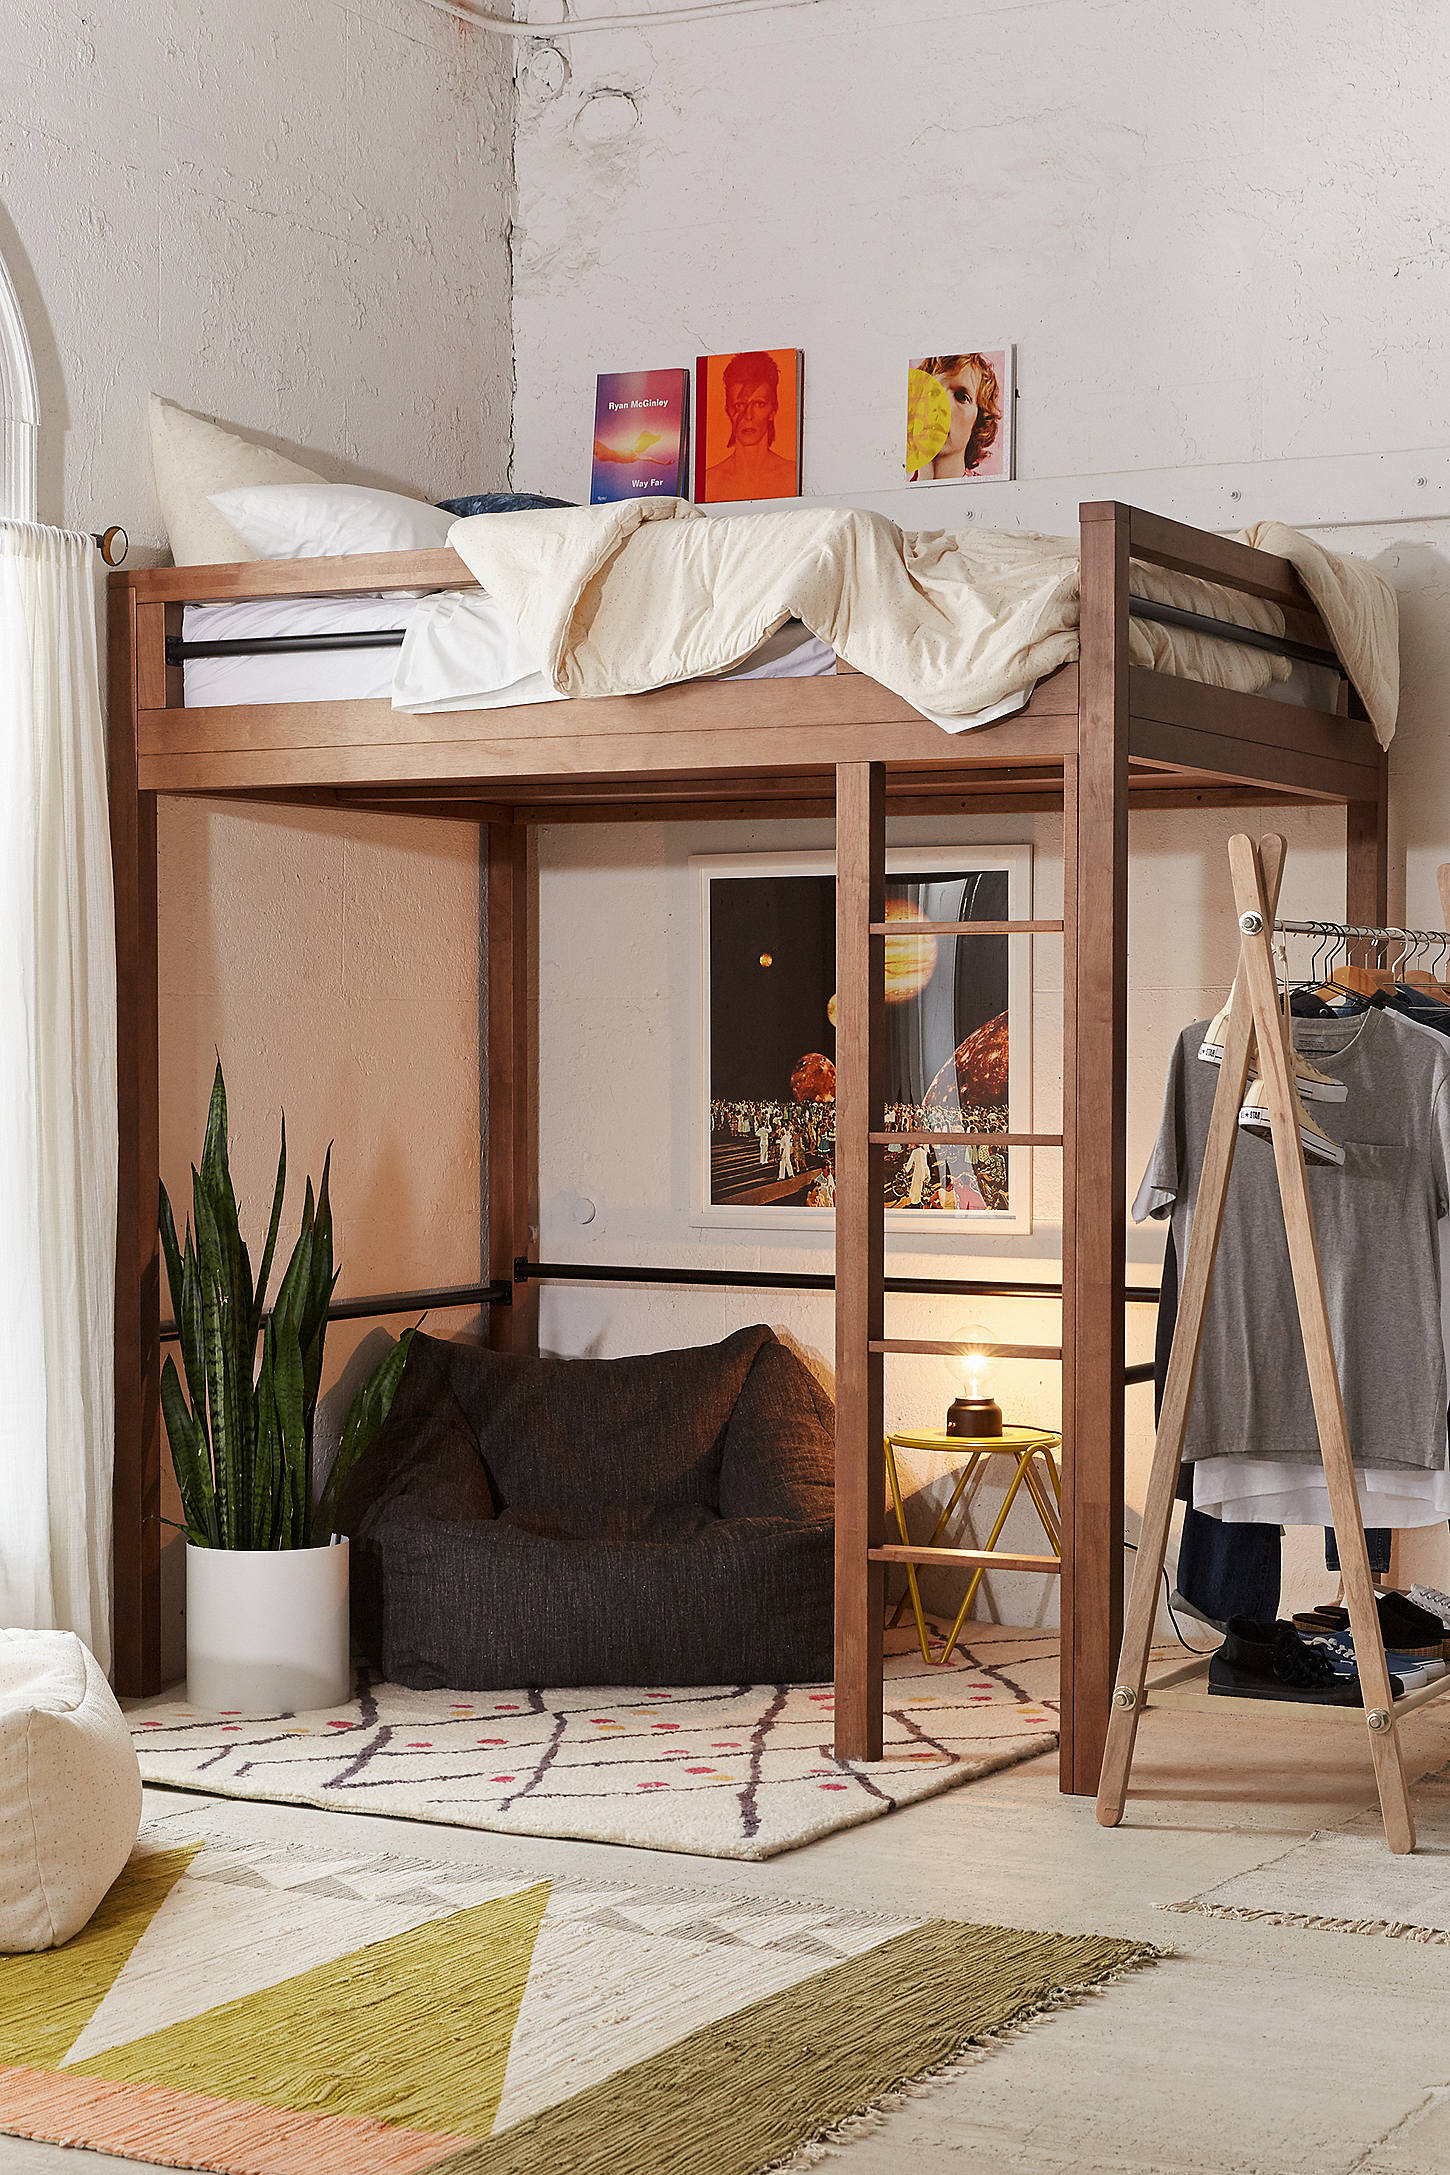 Loft Bed Is The Ultimate Space Saver For Your Home